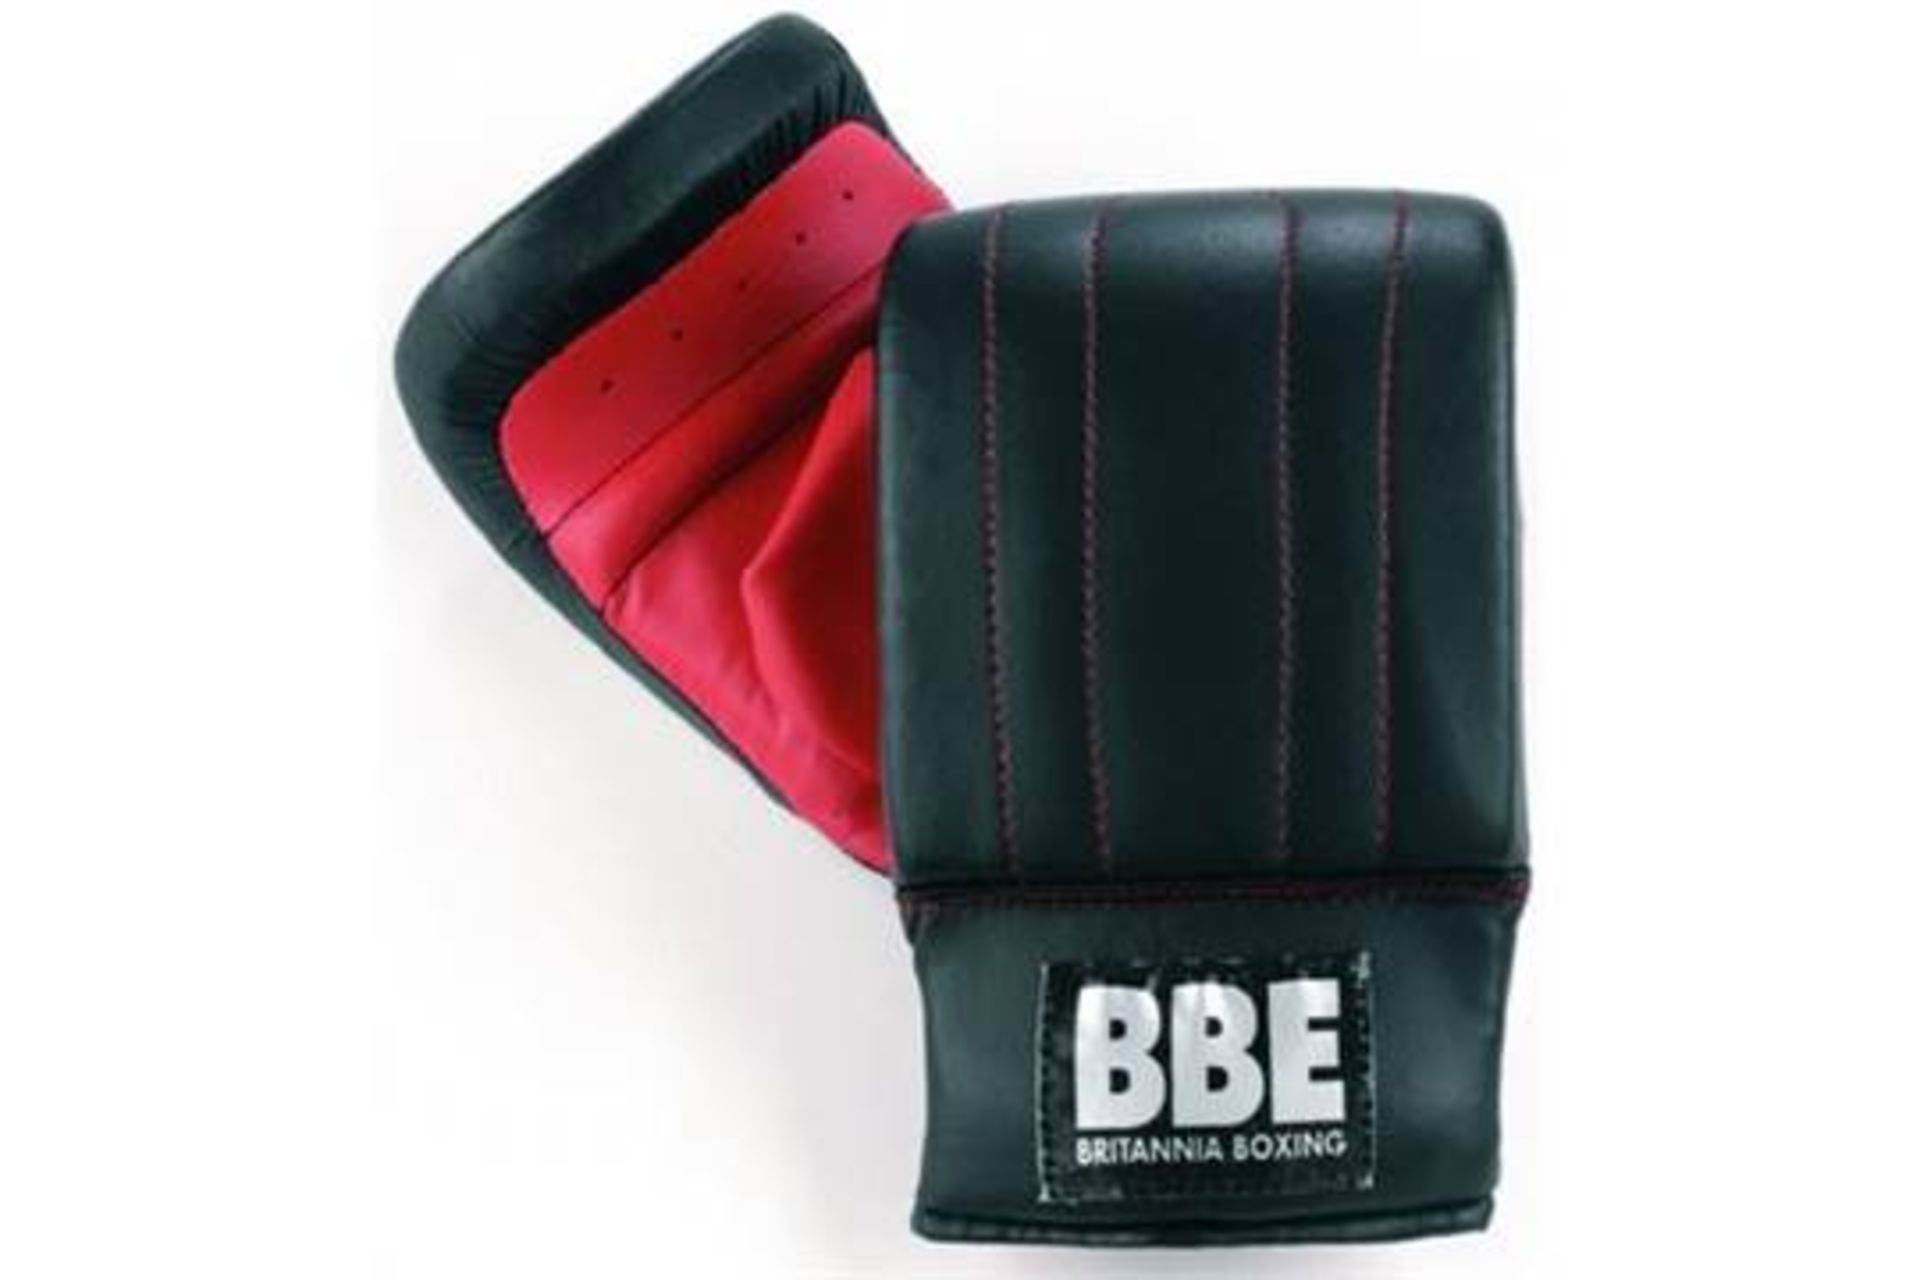 4 x Boxes of BBE Boxing Gloves - 125 per Box